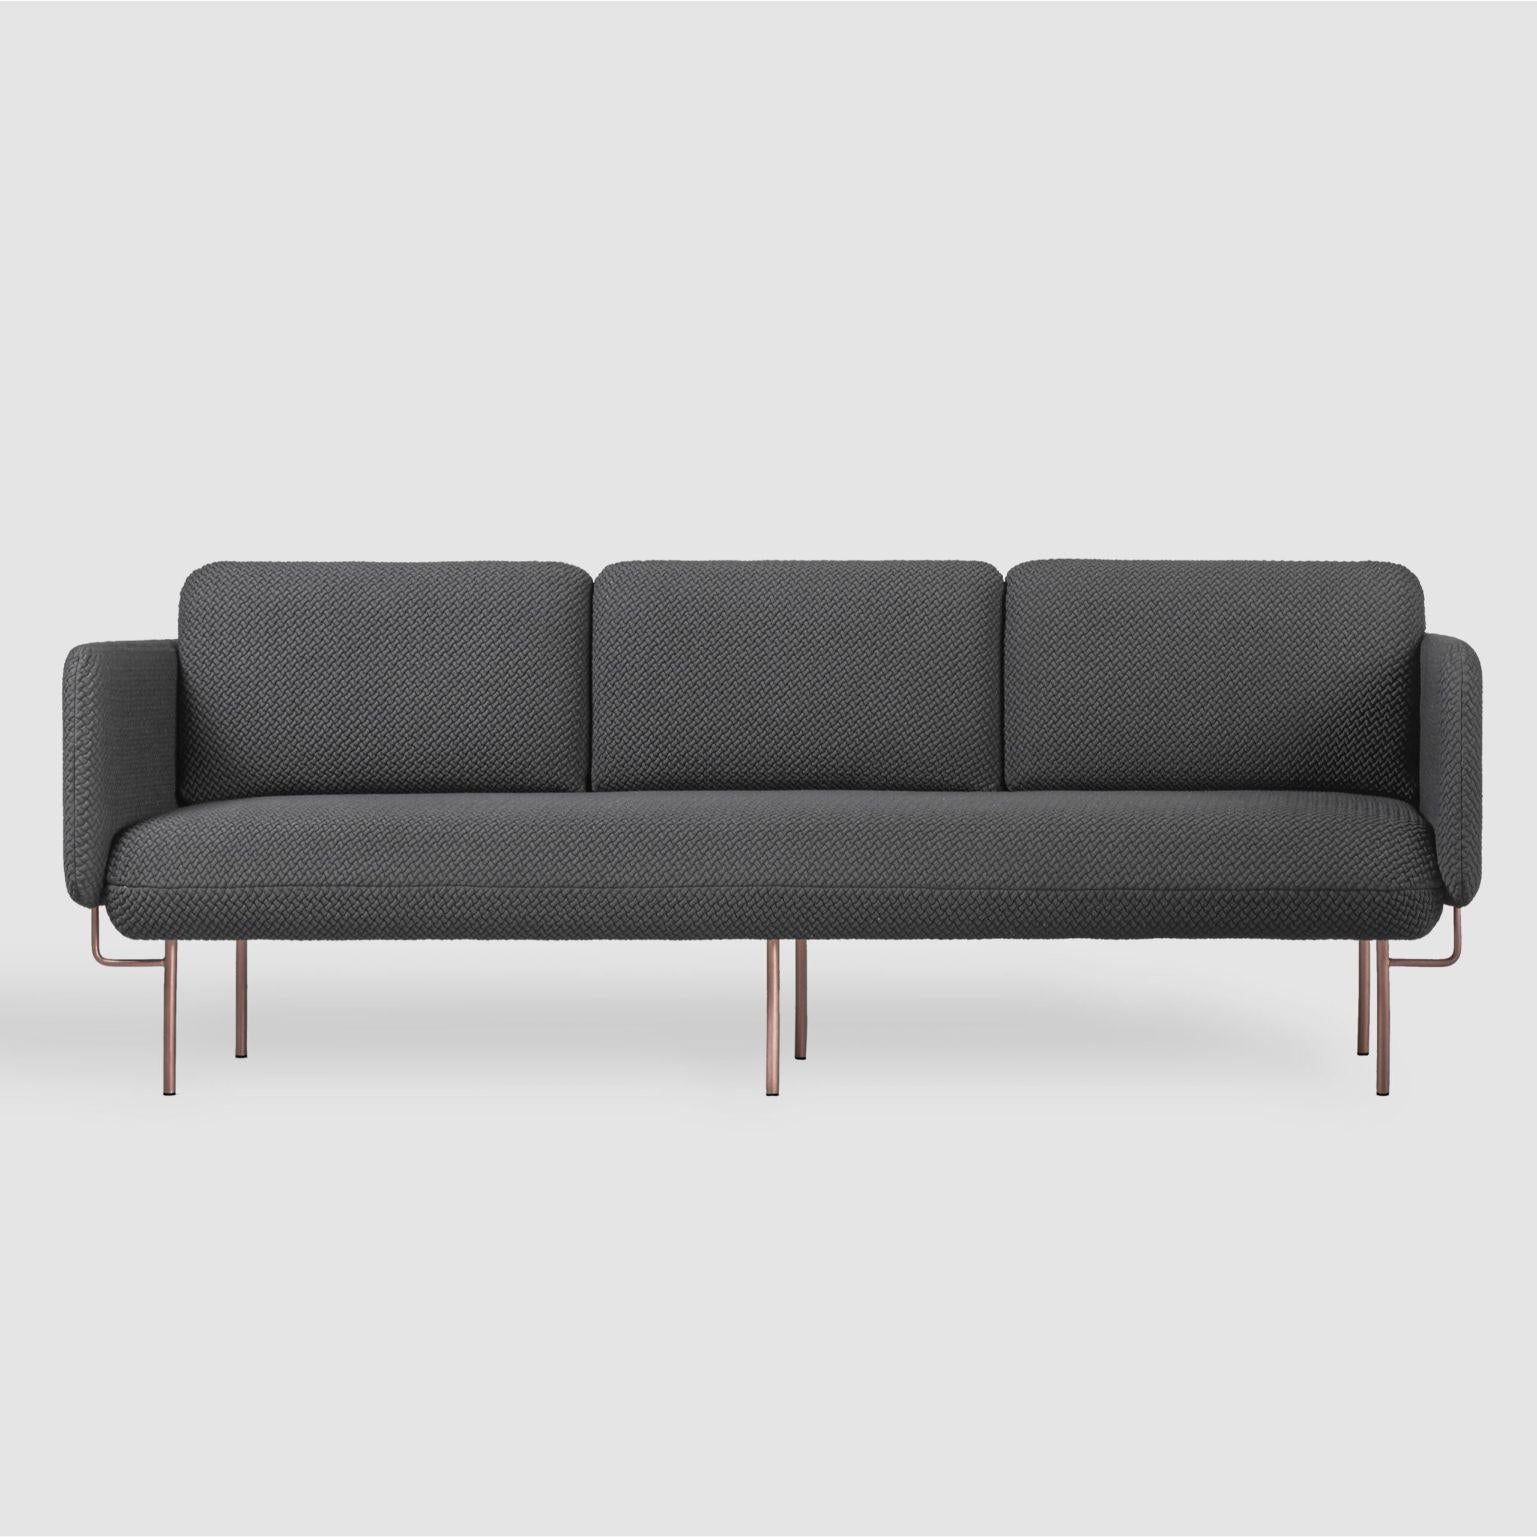 Grey Alce sofa, Maxi by Pepe Albargues
Dimensions: W224, D88, H82, Seat45 (3 and a Half Seaters)
Materials: Iron structure and MDF board
Painted or chromed legs
Foam CMHR (high resilience and flame retardant) for all our cushion filling